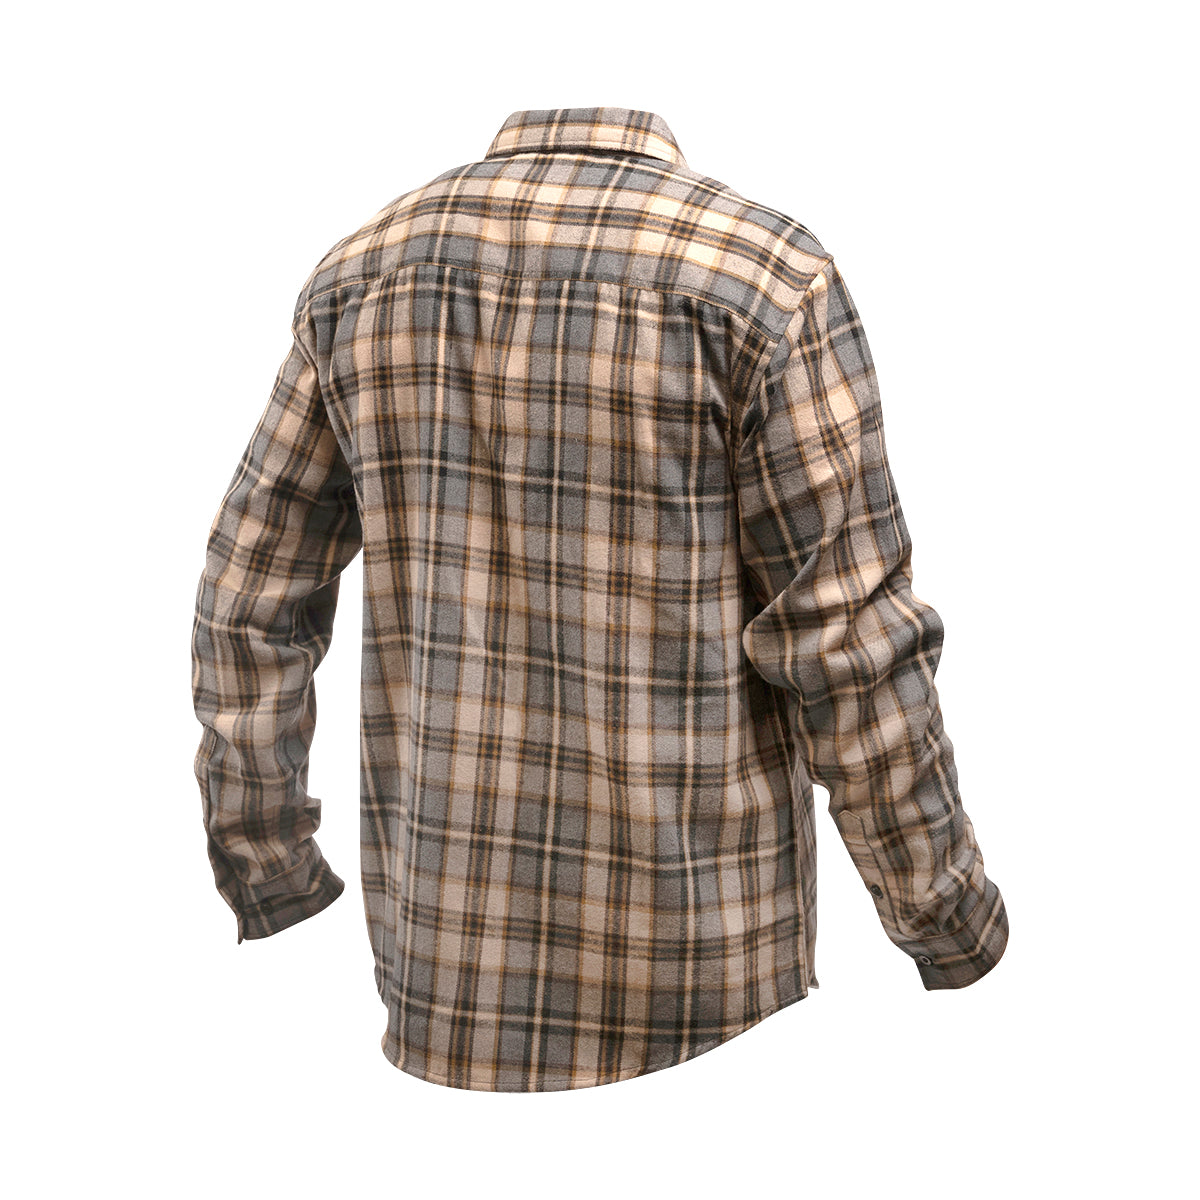 Saturday Night Special Youth Flannel - Beige